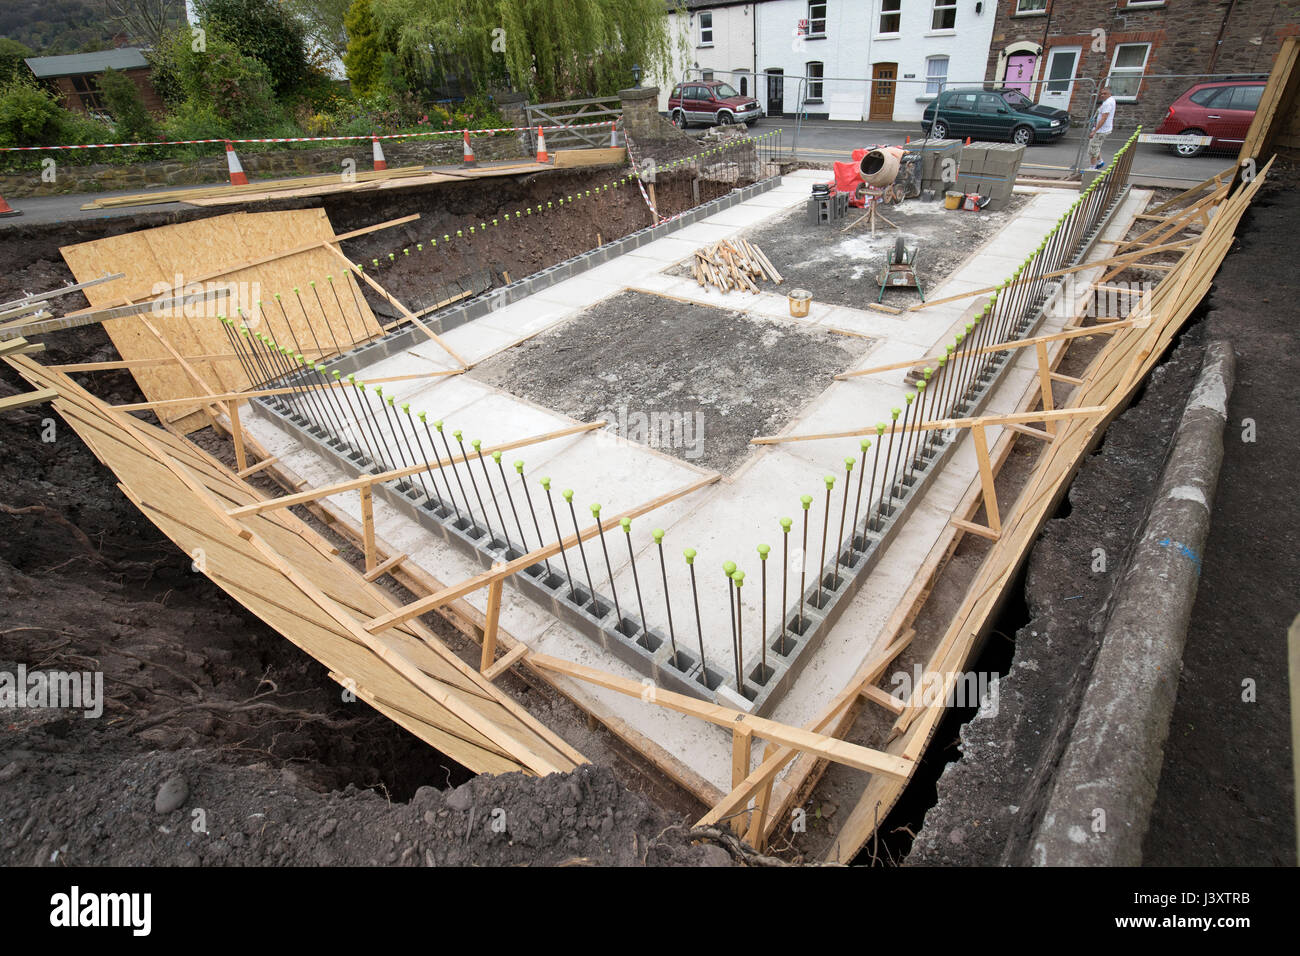 Concrete footings prepared for new build house infill plot dug into bank, Abergavenny, Wales, UK Stock Photo